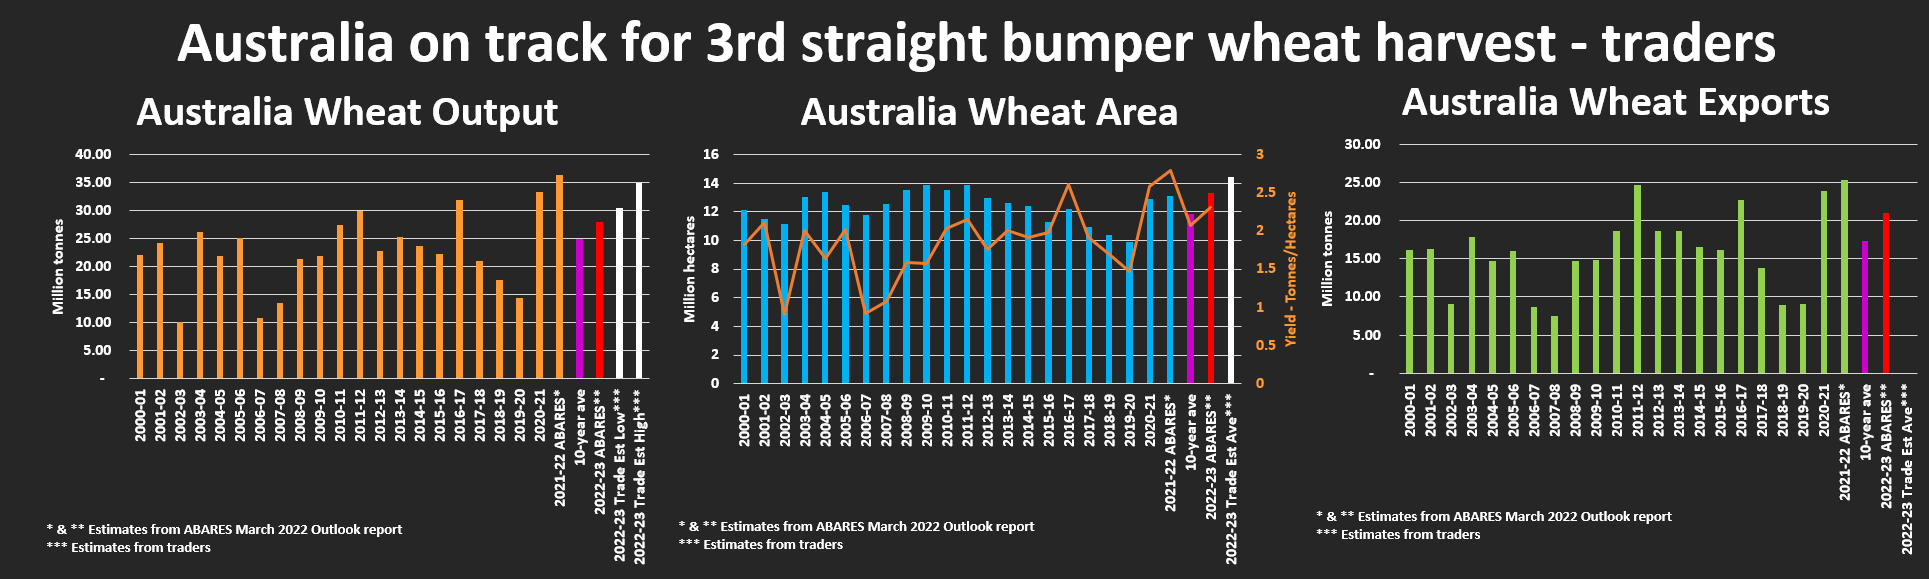 Australia on track for 3rd straight bumper wheat harvest - traders